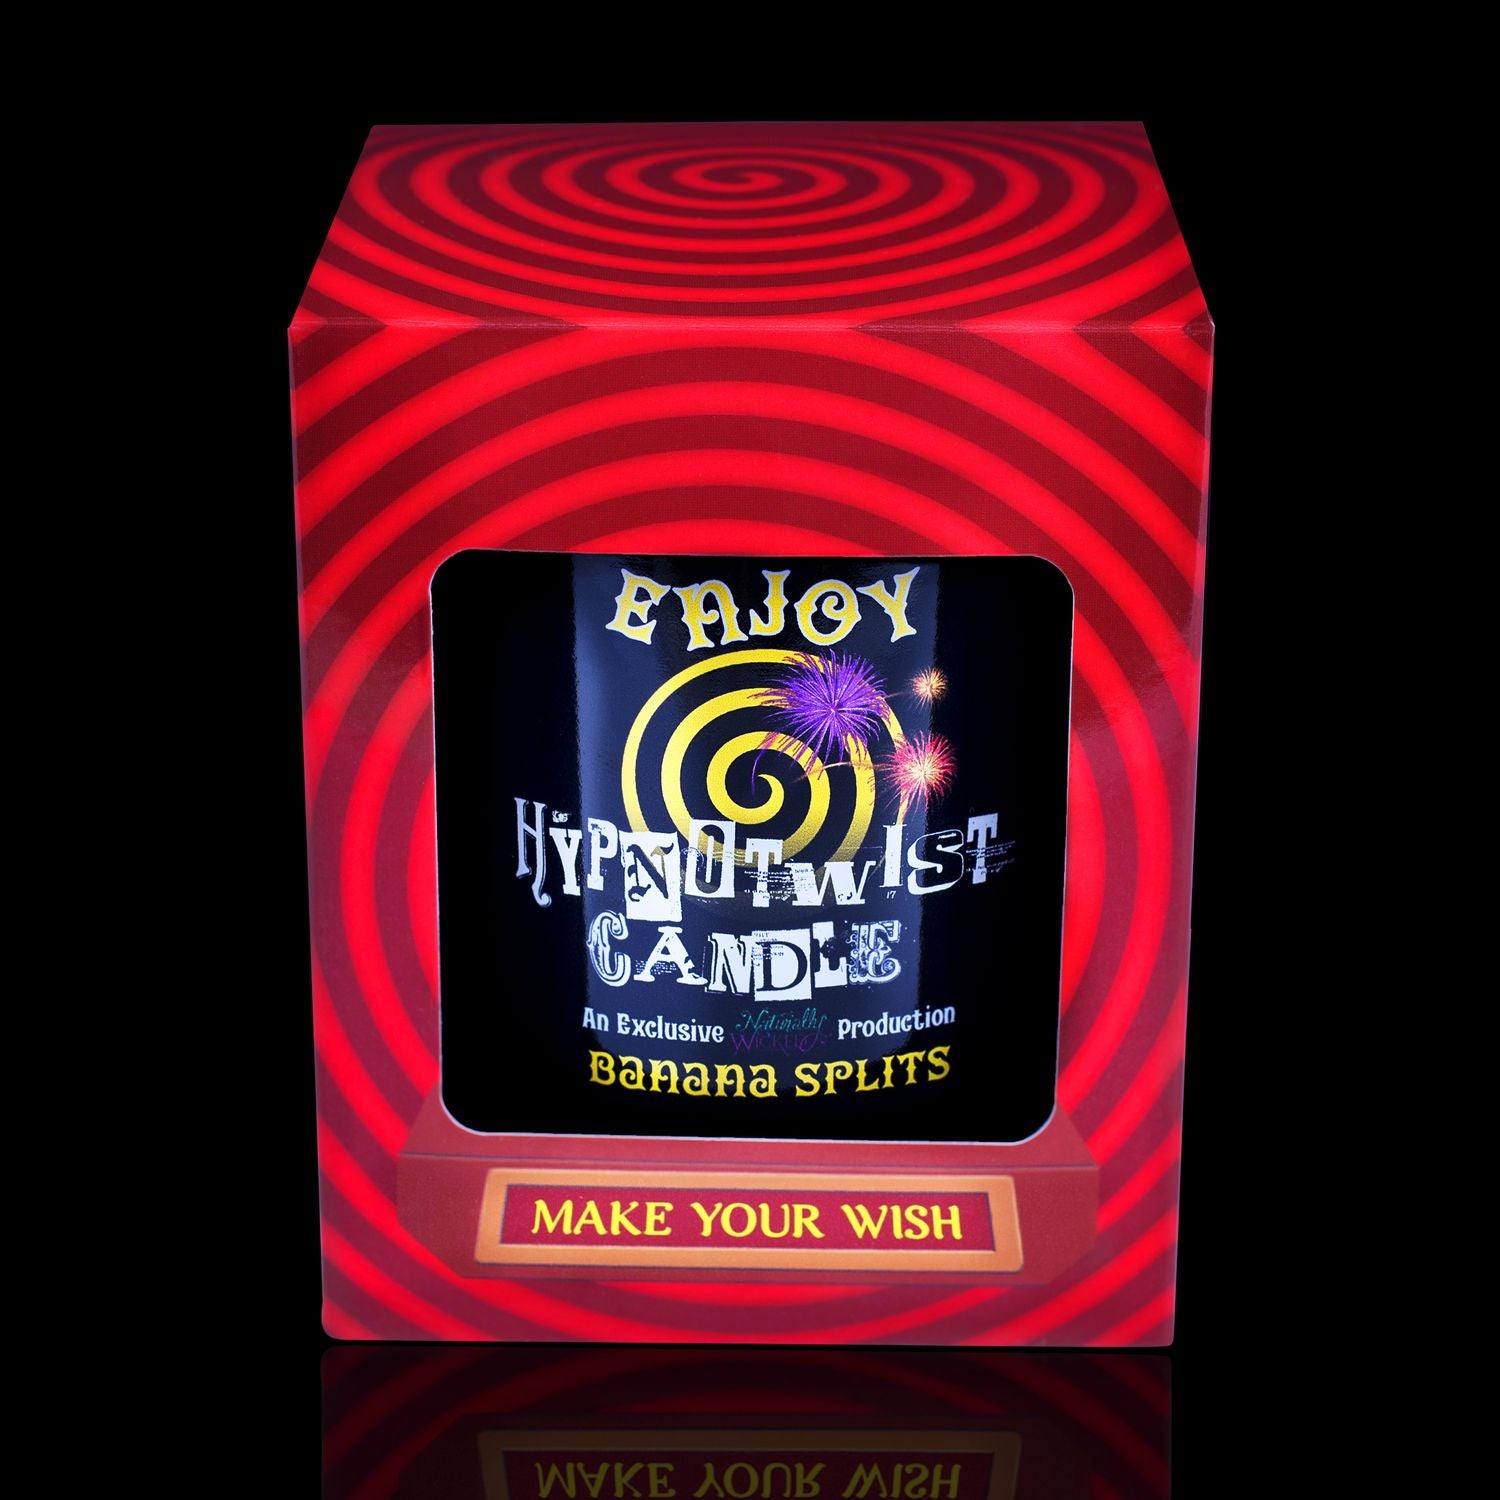 Make Your Wish With The Naturally Wicked Hypnotwist Enjoy Candle, Plant-based Soy Yellow Wax Scented With Banana Splits, Including A Yellow Jade Crystal Spinning Top, Mirrored Lid & Red Circus Hypnotic Gift Box